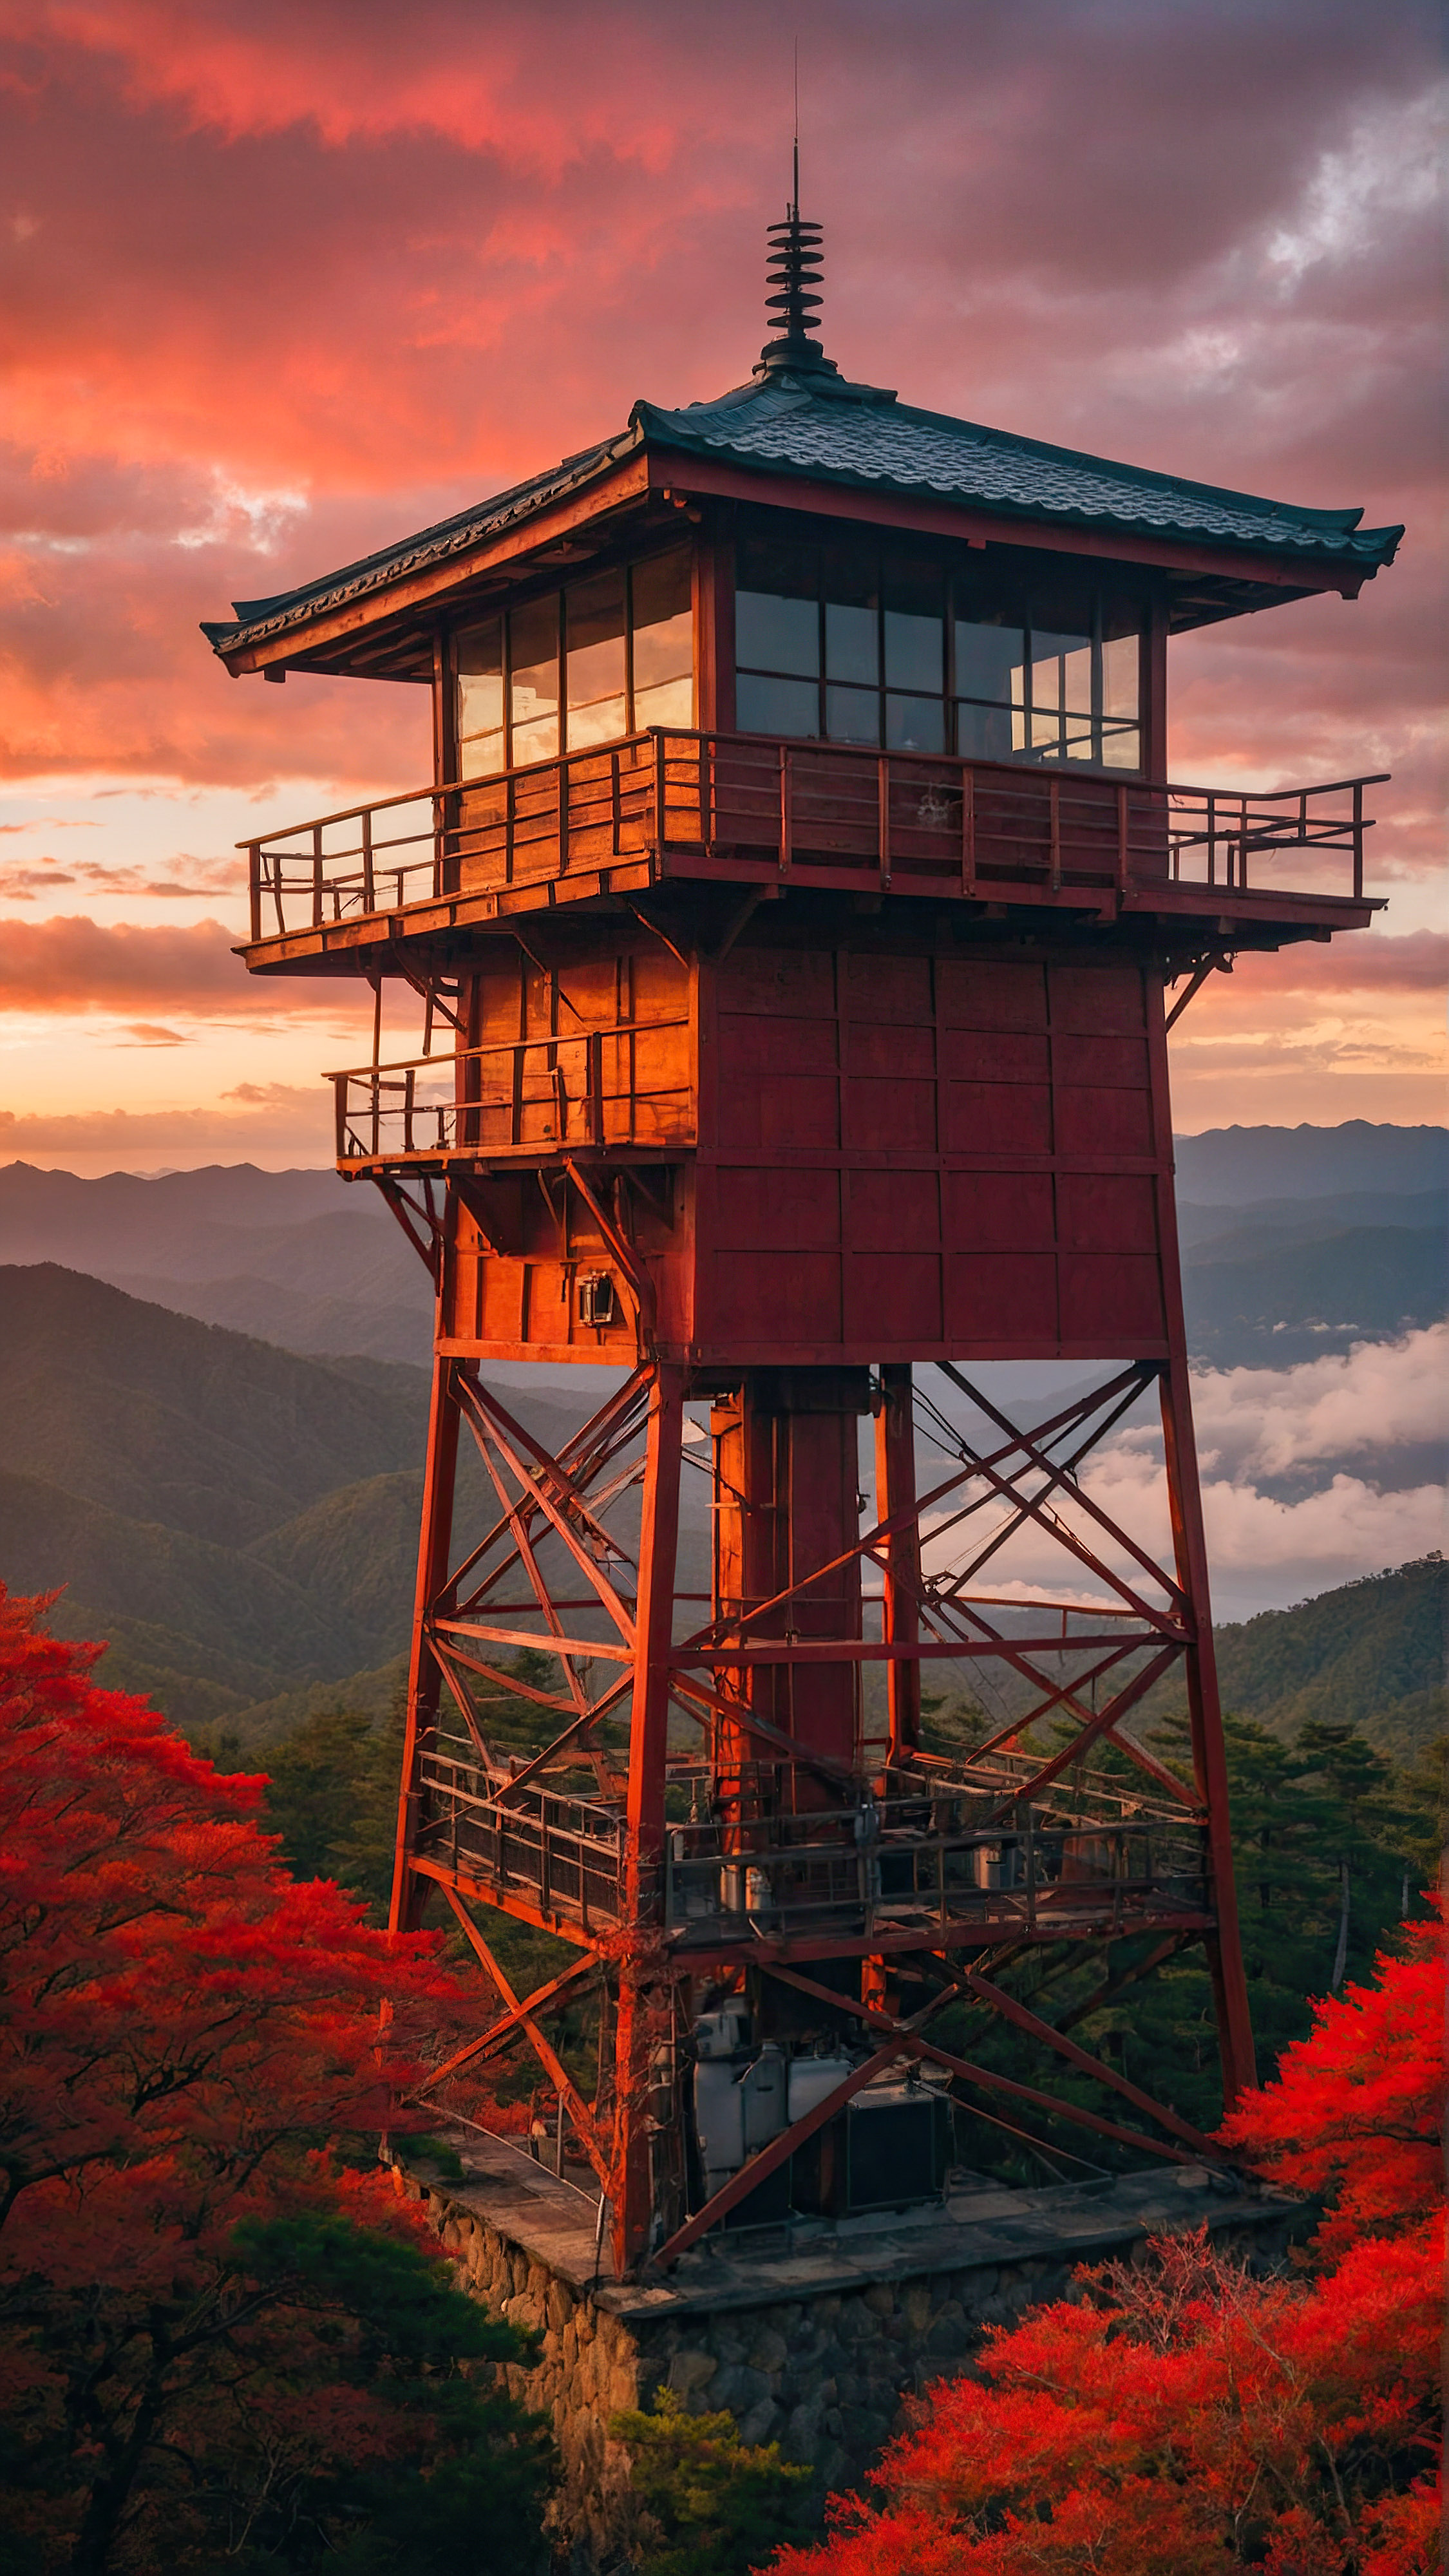 Transform your phone’s look with an aesthetic wallpaper, capturing a serene and picturesque Japanese scene of a fire lookout tower amidst a forest with mountains in the background, under a vibrant red sky with the sun setting or rising.